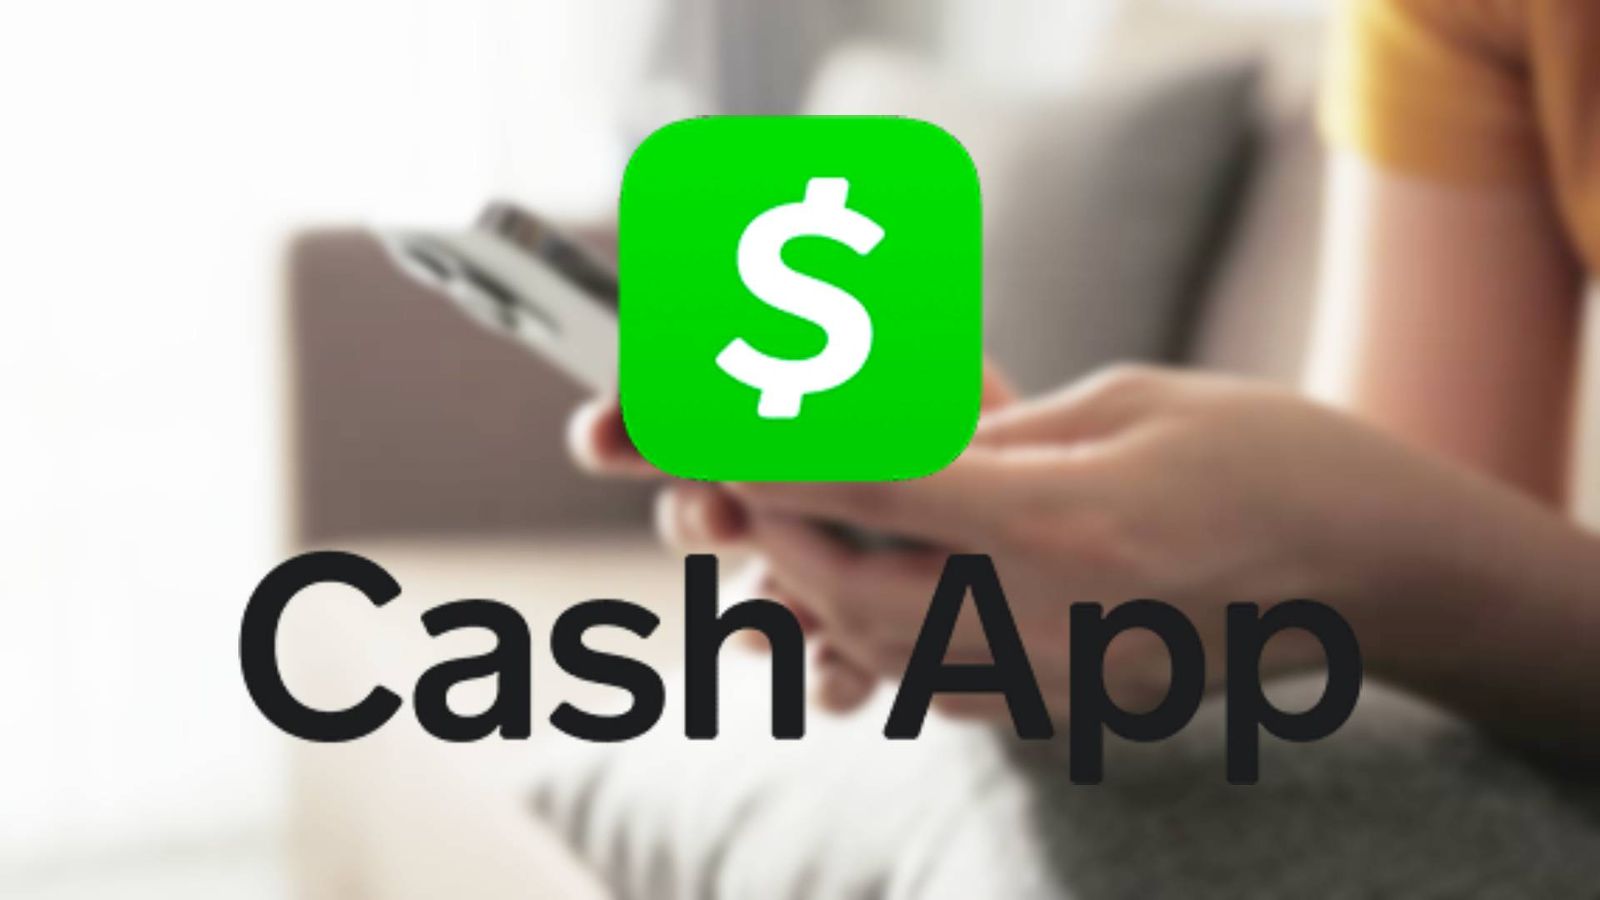 How to deposit a check on Cash App - An image of the logo of Cash App with a person using smartphone in the background